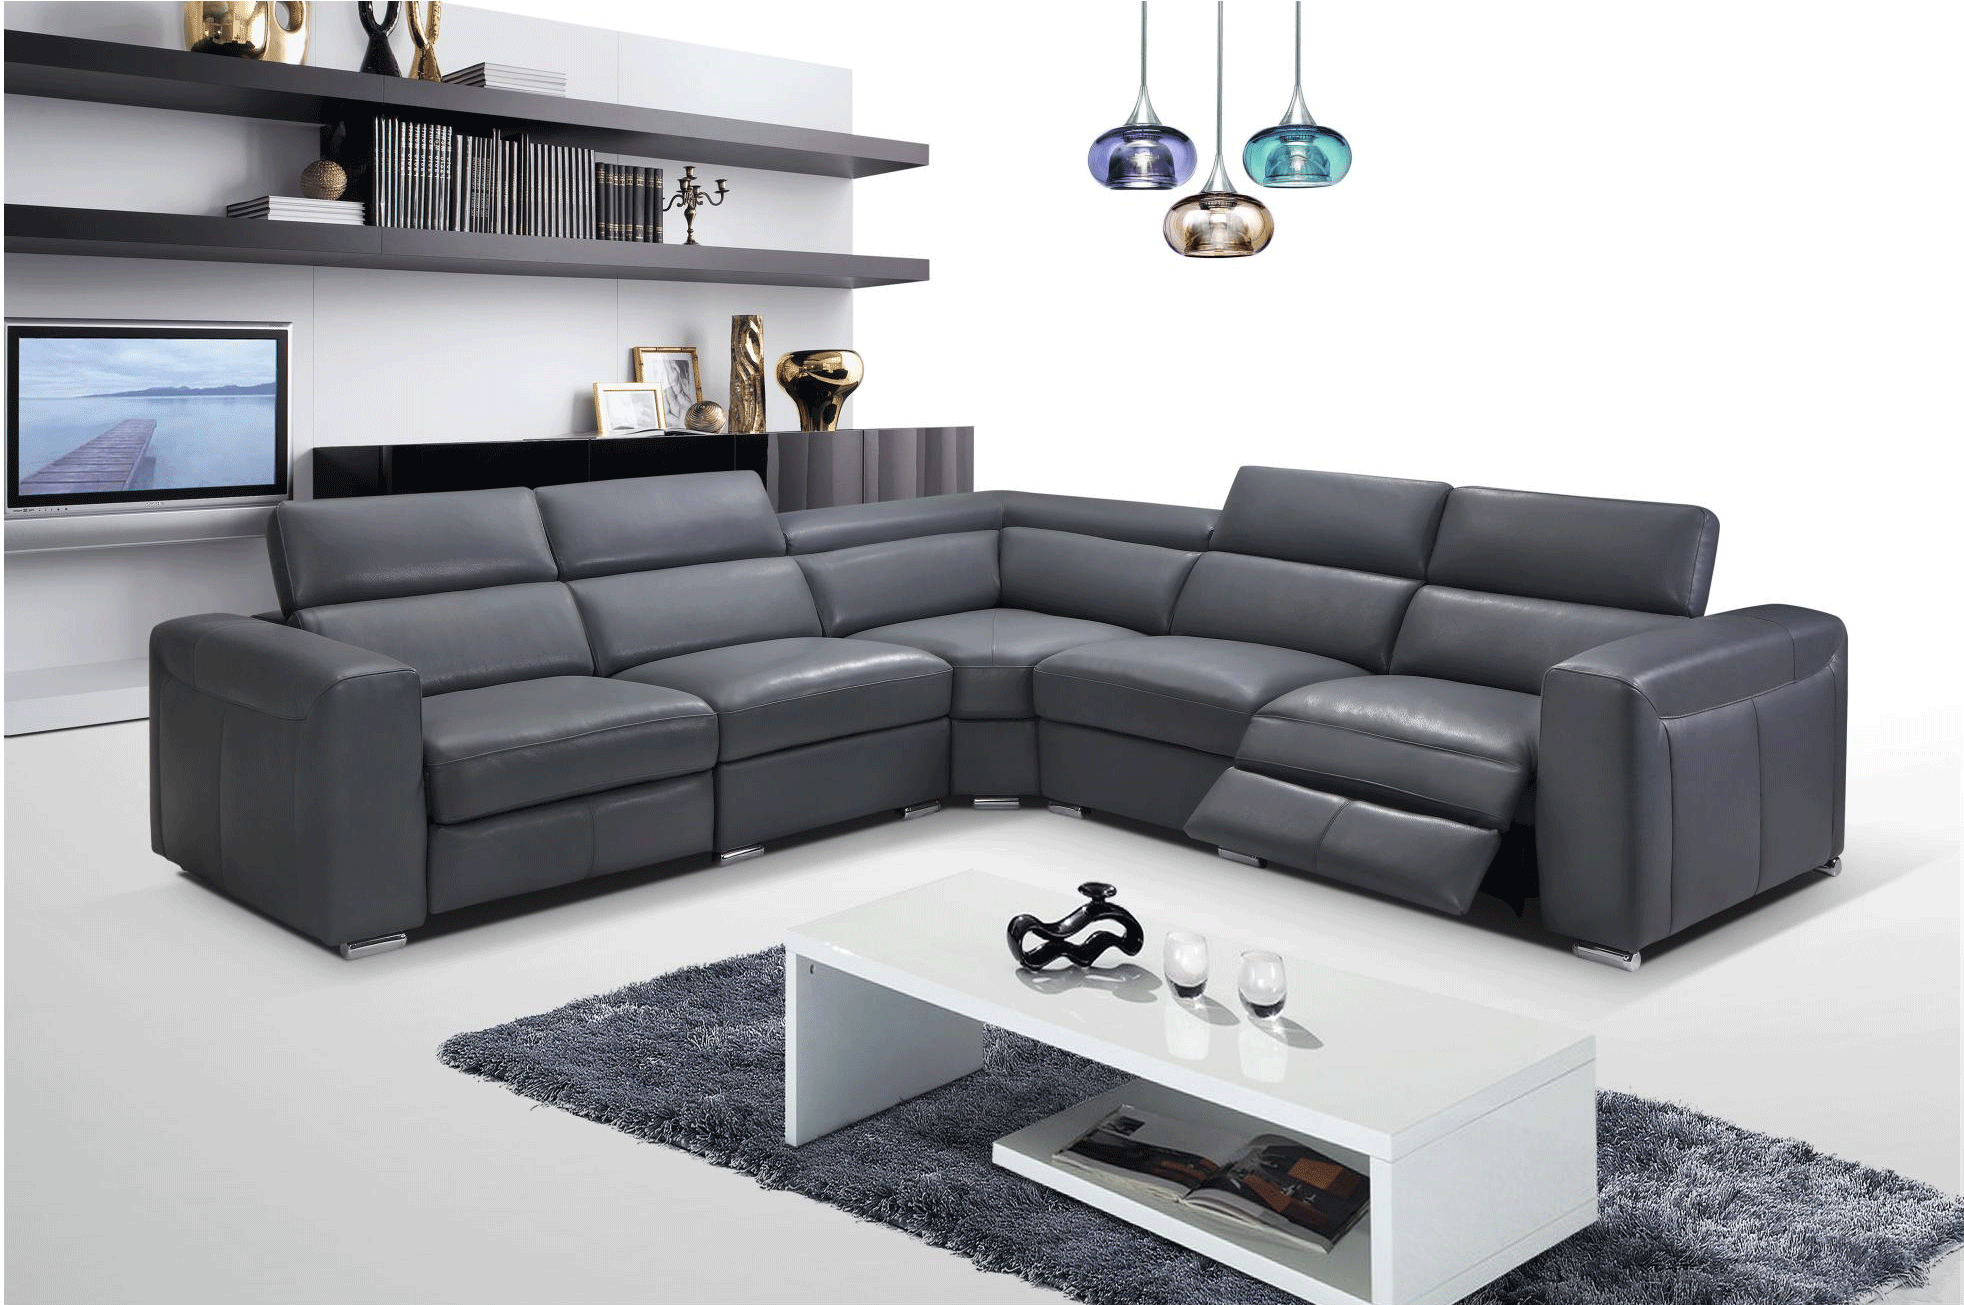 Dining Room Furniture Modern Dining Room Sets 2919 Sectional w/ recliners